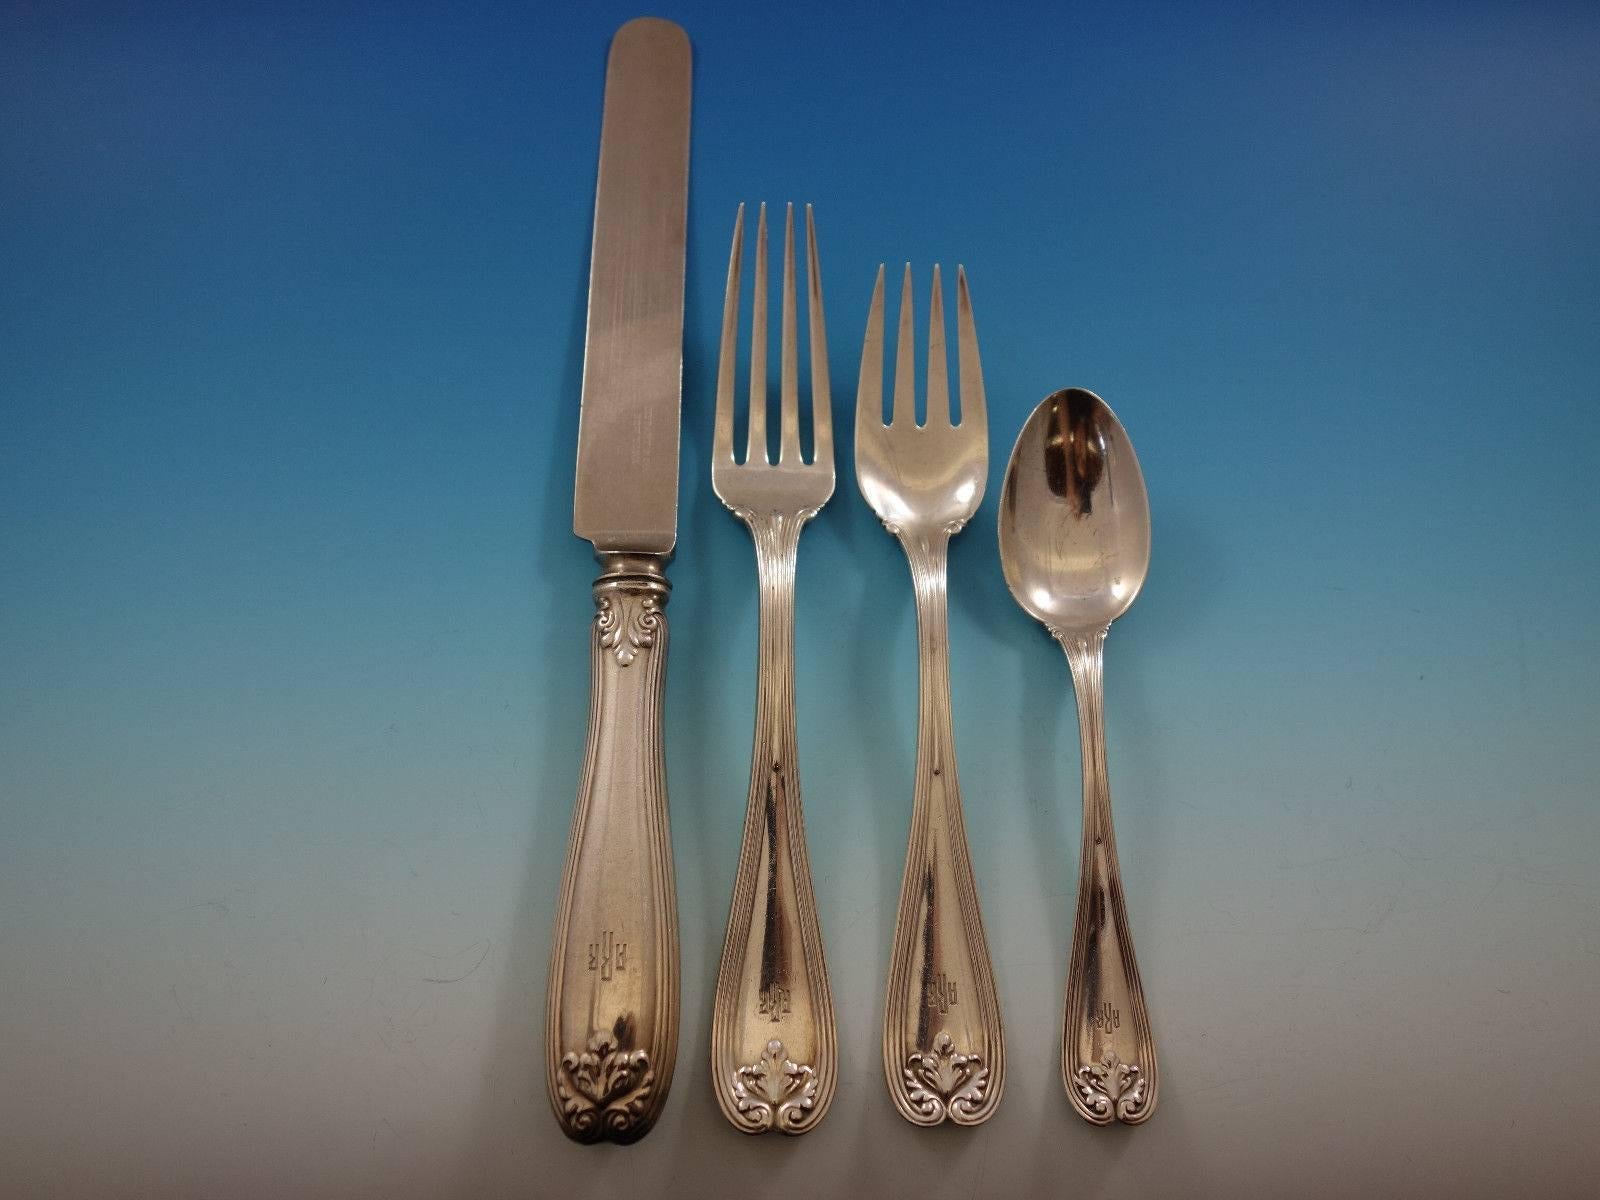 Outstanding Colonial by Tiffany & Co. sterling silver Flatware set in original Tiffany fitted box -134 Pieces. This set includes:

12 DINNER SIZE KNIVES W/BLUNT SILVERPLATED BLADES, 10 1/4